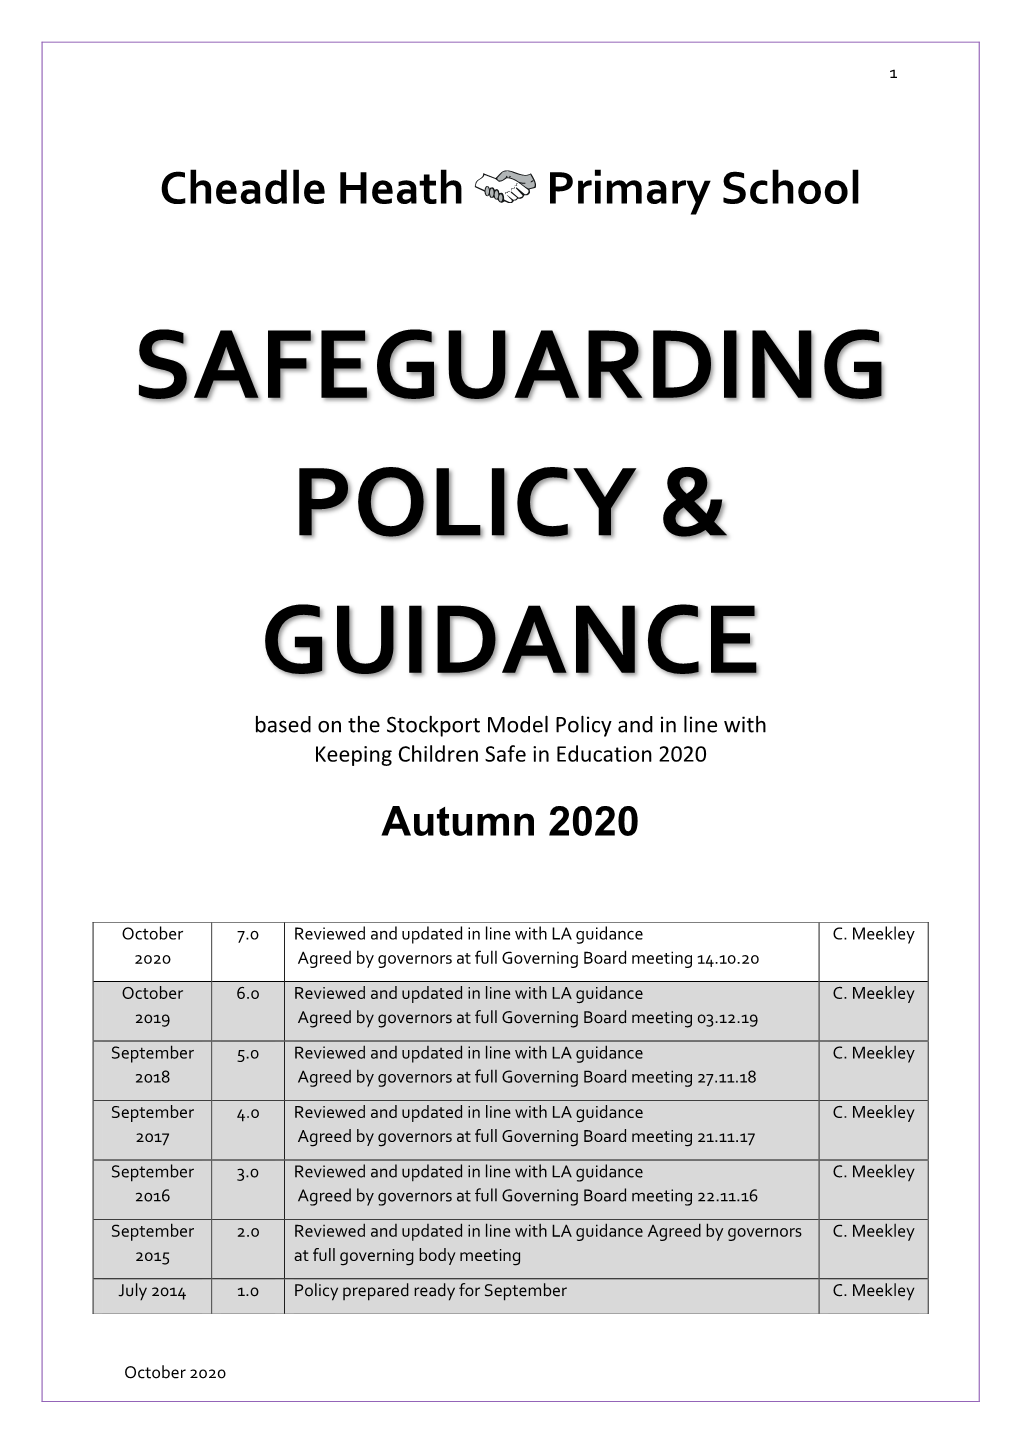 Safeguarding Policy & Guidance